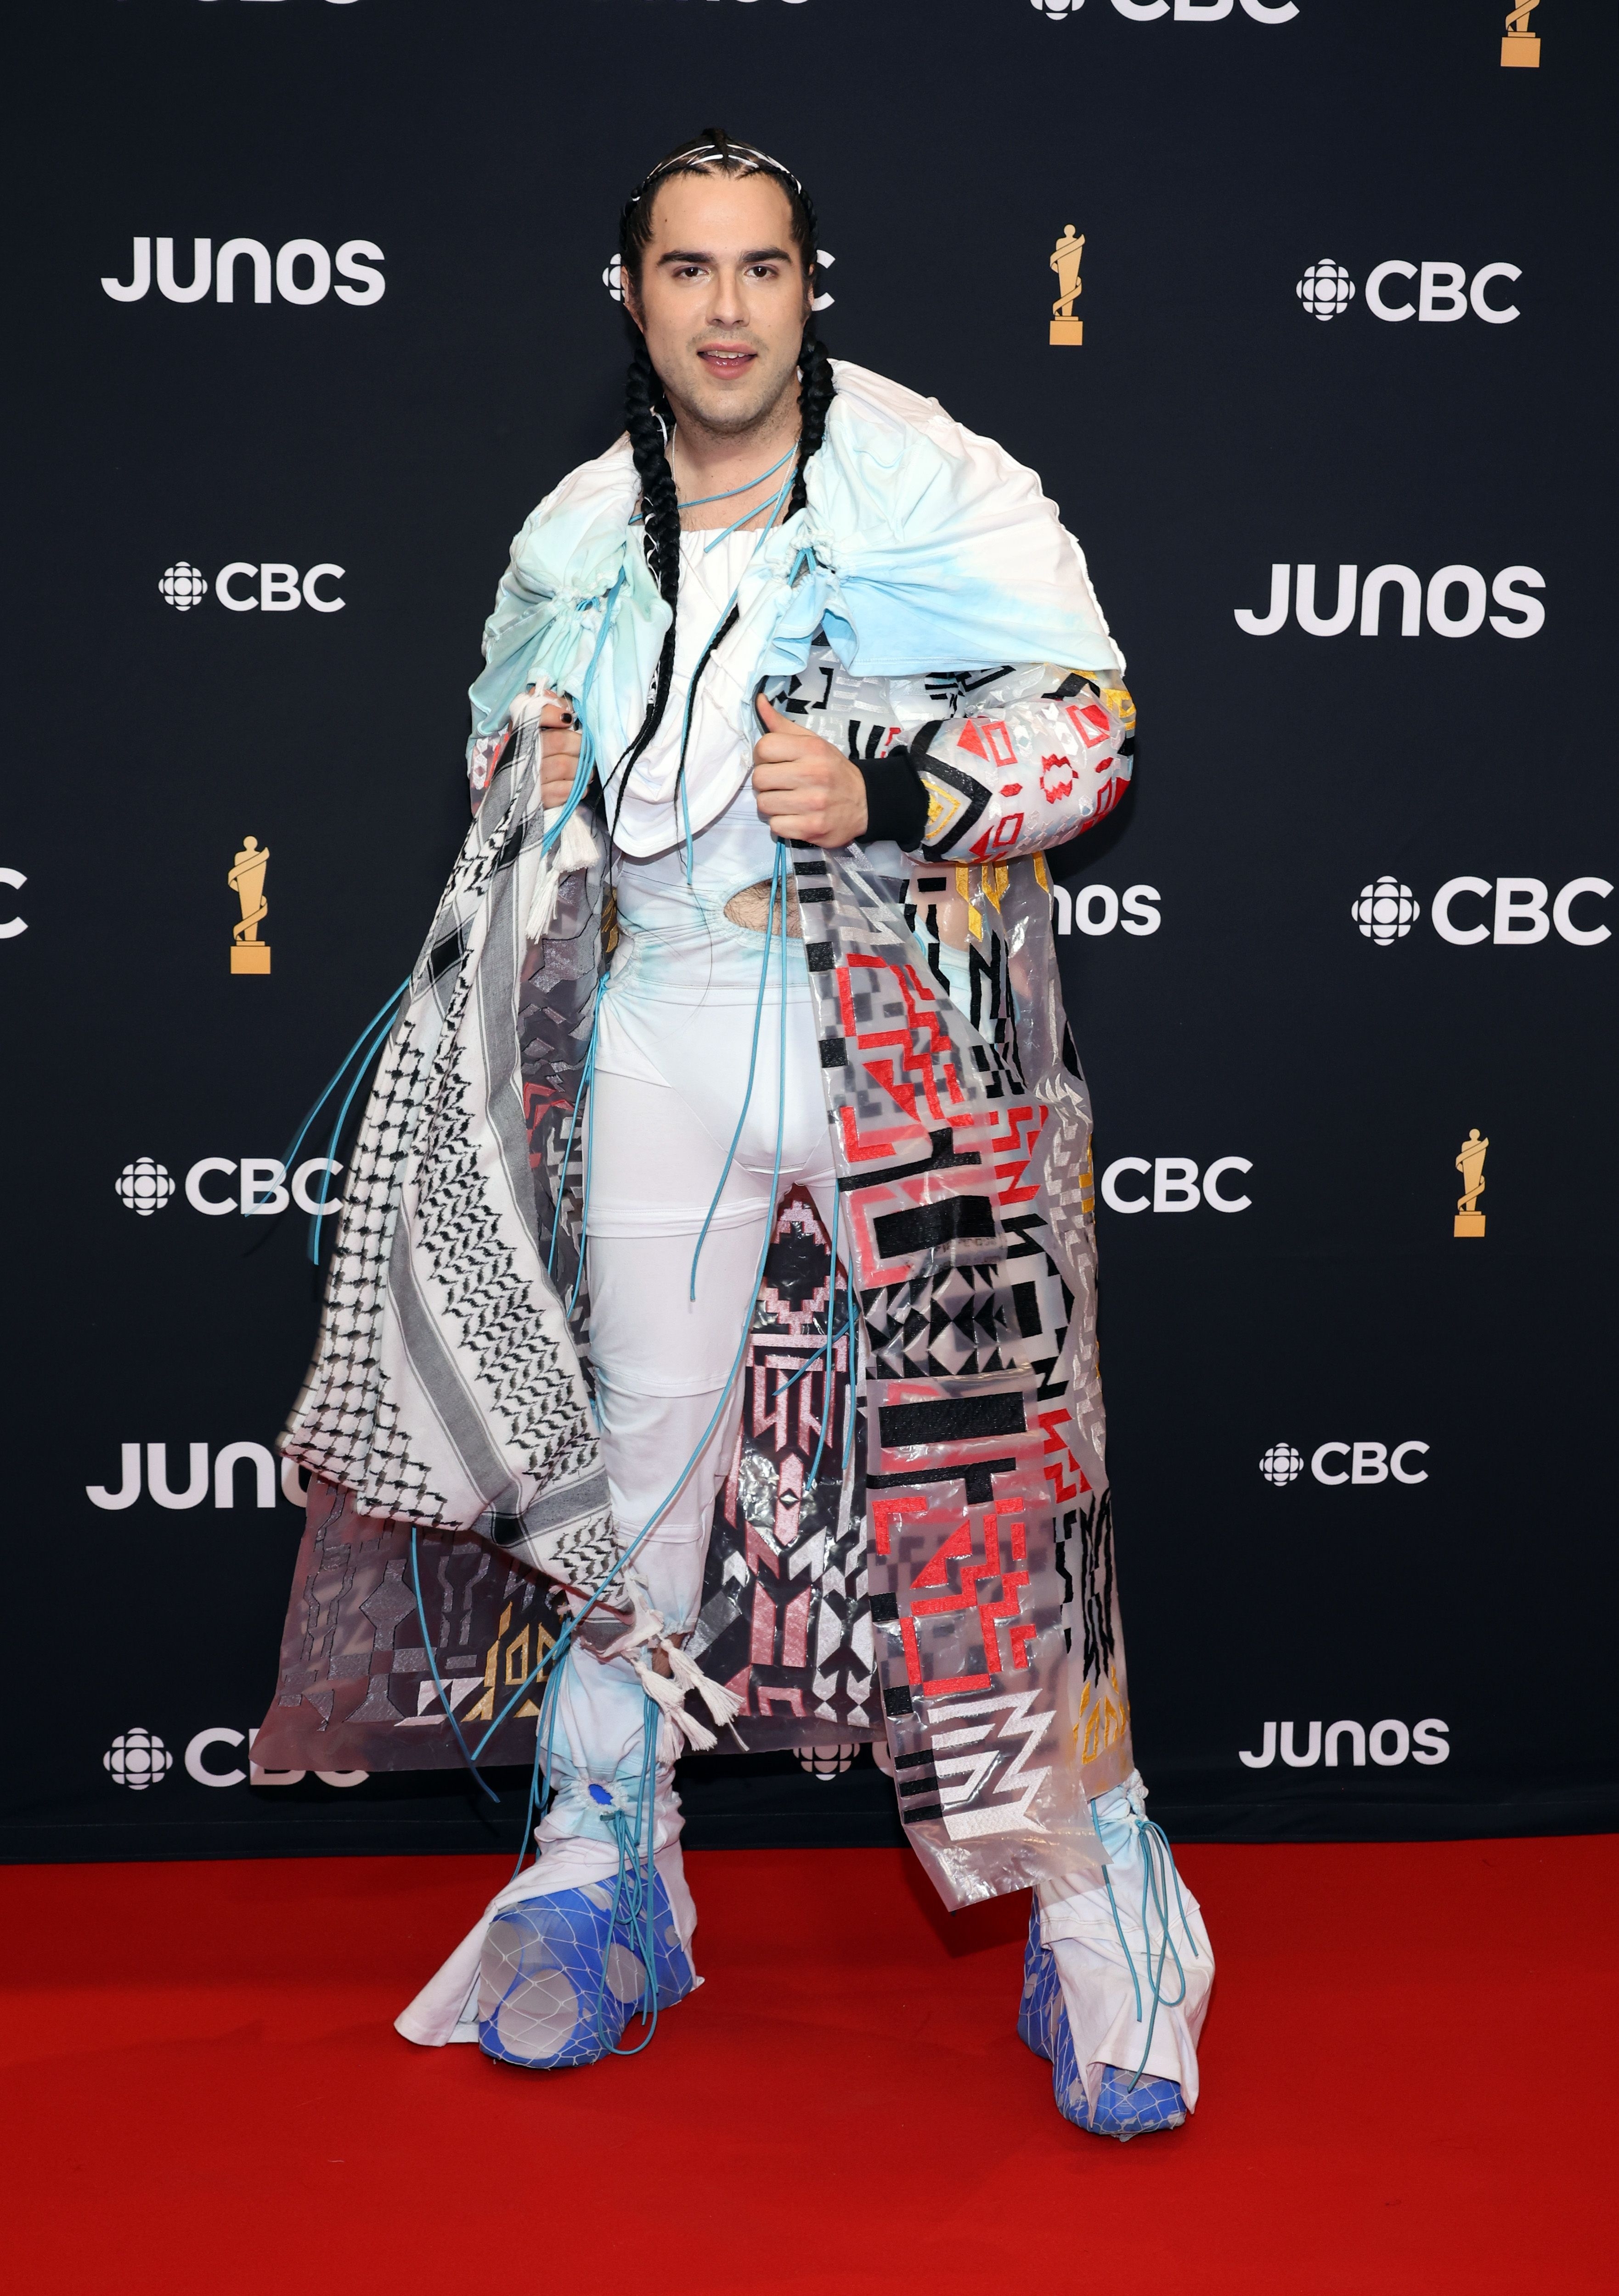 Person on red carpet in eclectic outfit with mixed patterns and layered white jacket